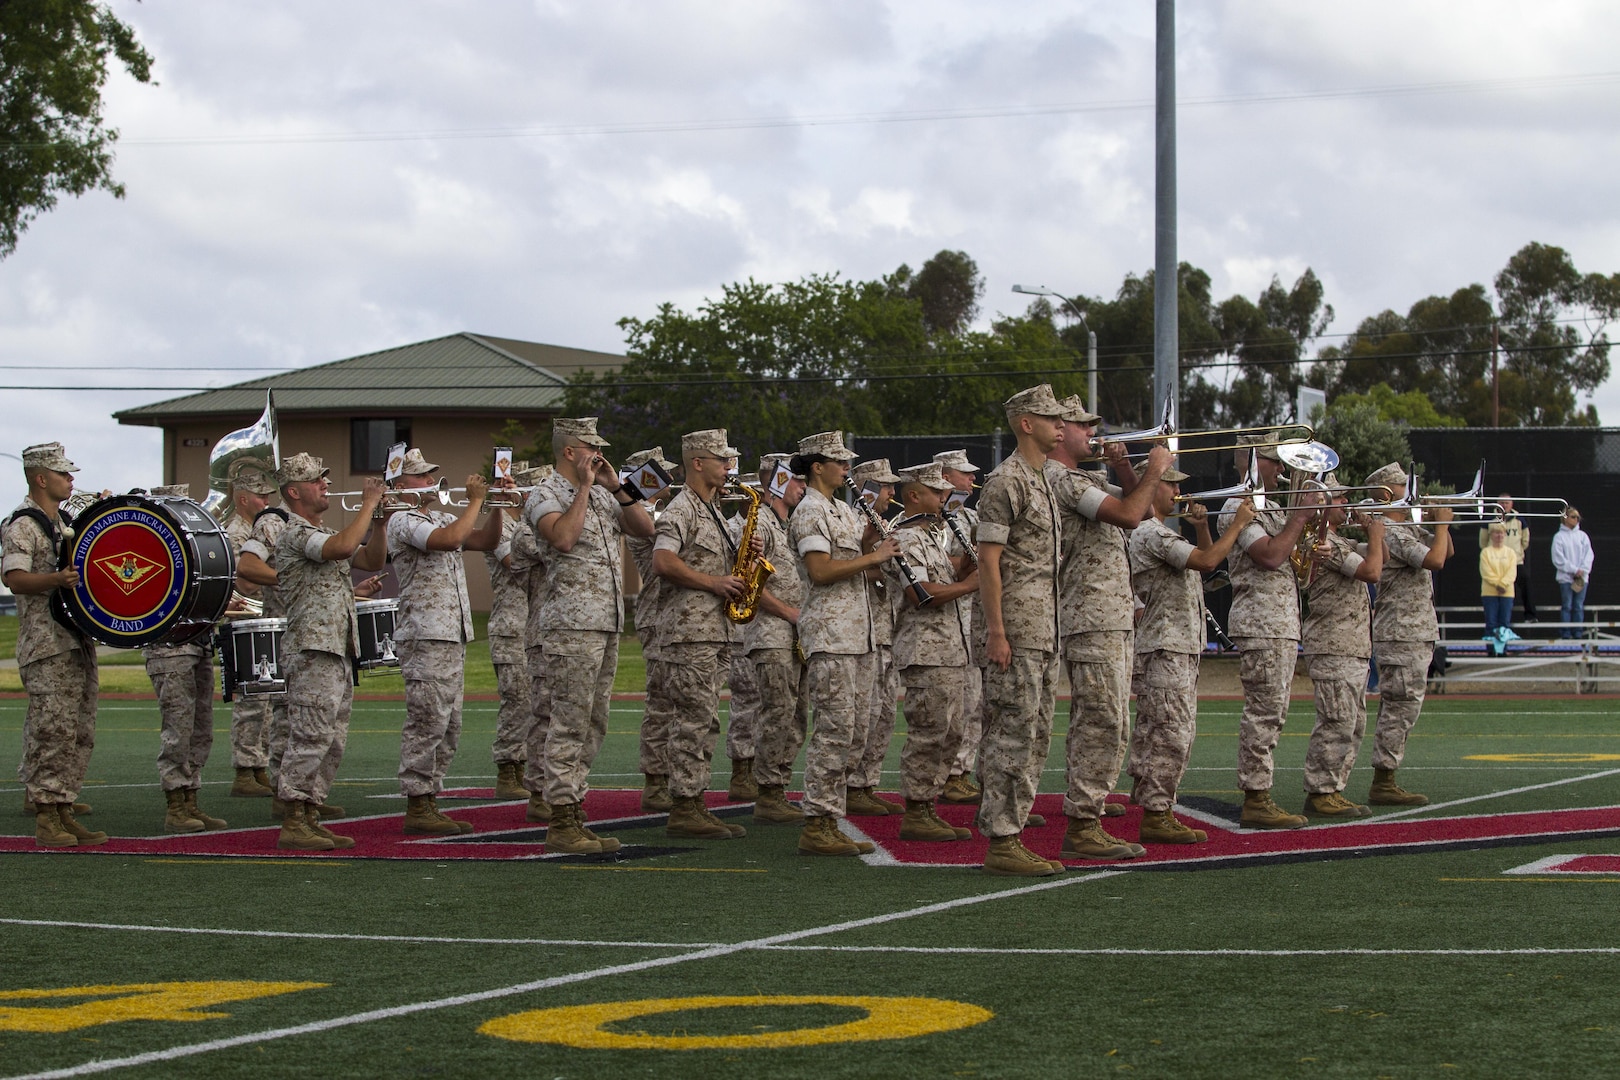 The 3rd Marine Aircraft Wing Band performs during the 2015 Armed Forces Soccer Championship May 14 at Marine Corps Air Station Miramar, Calif. Service members from each branch will compete in the weeklong championship.